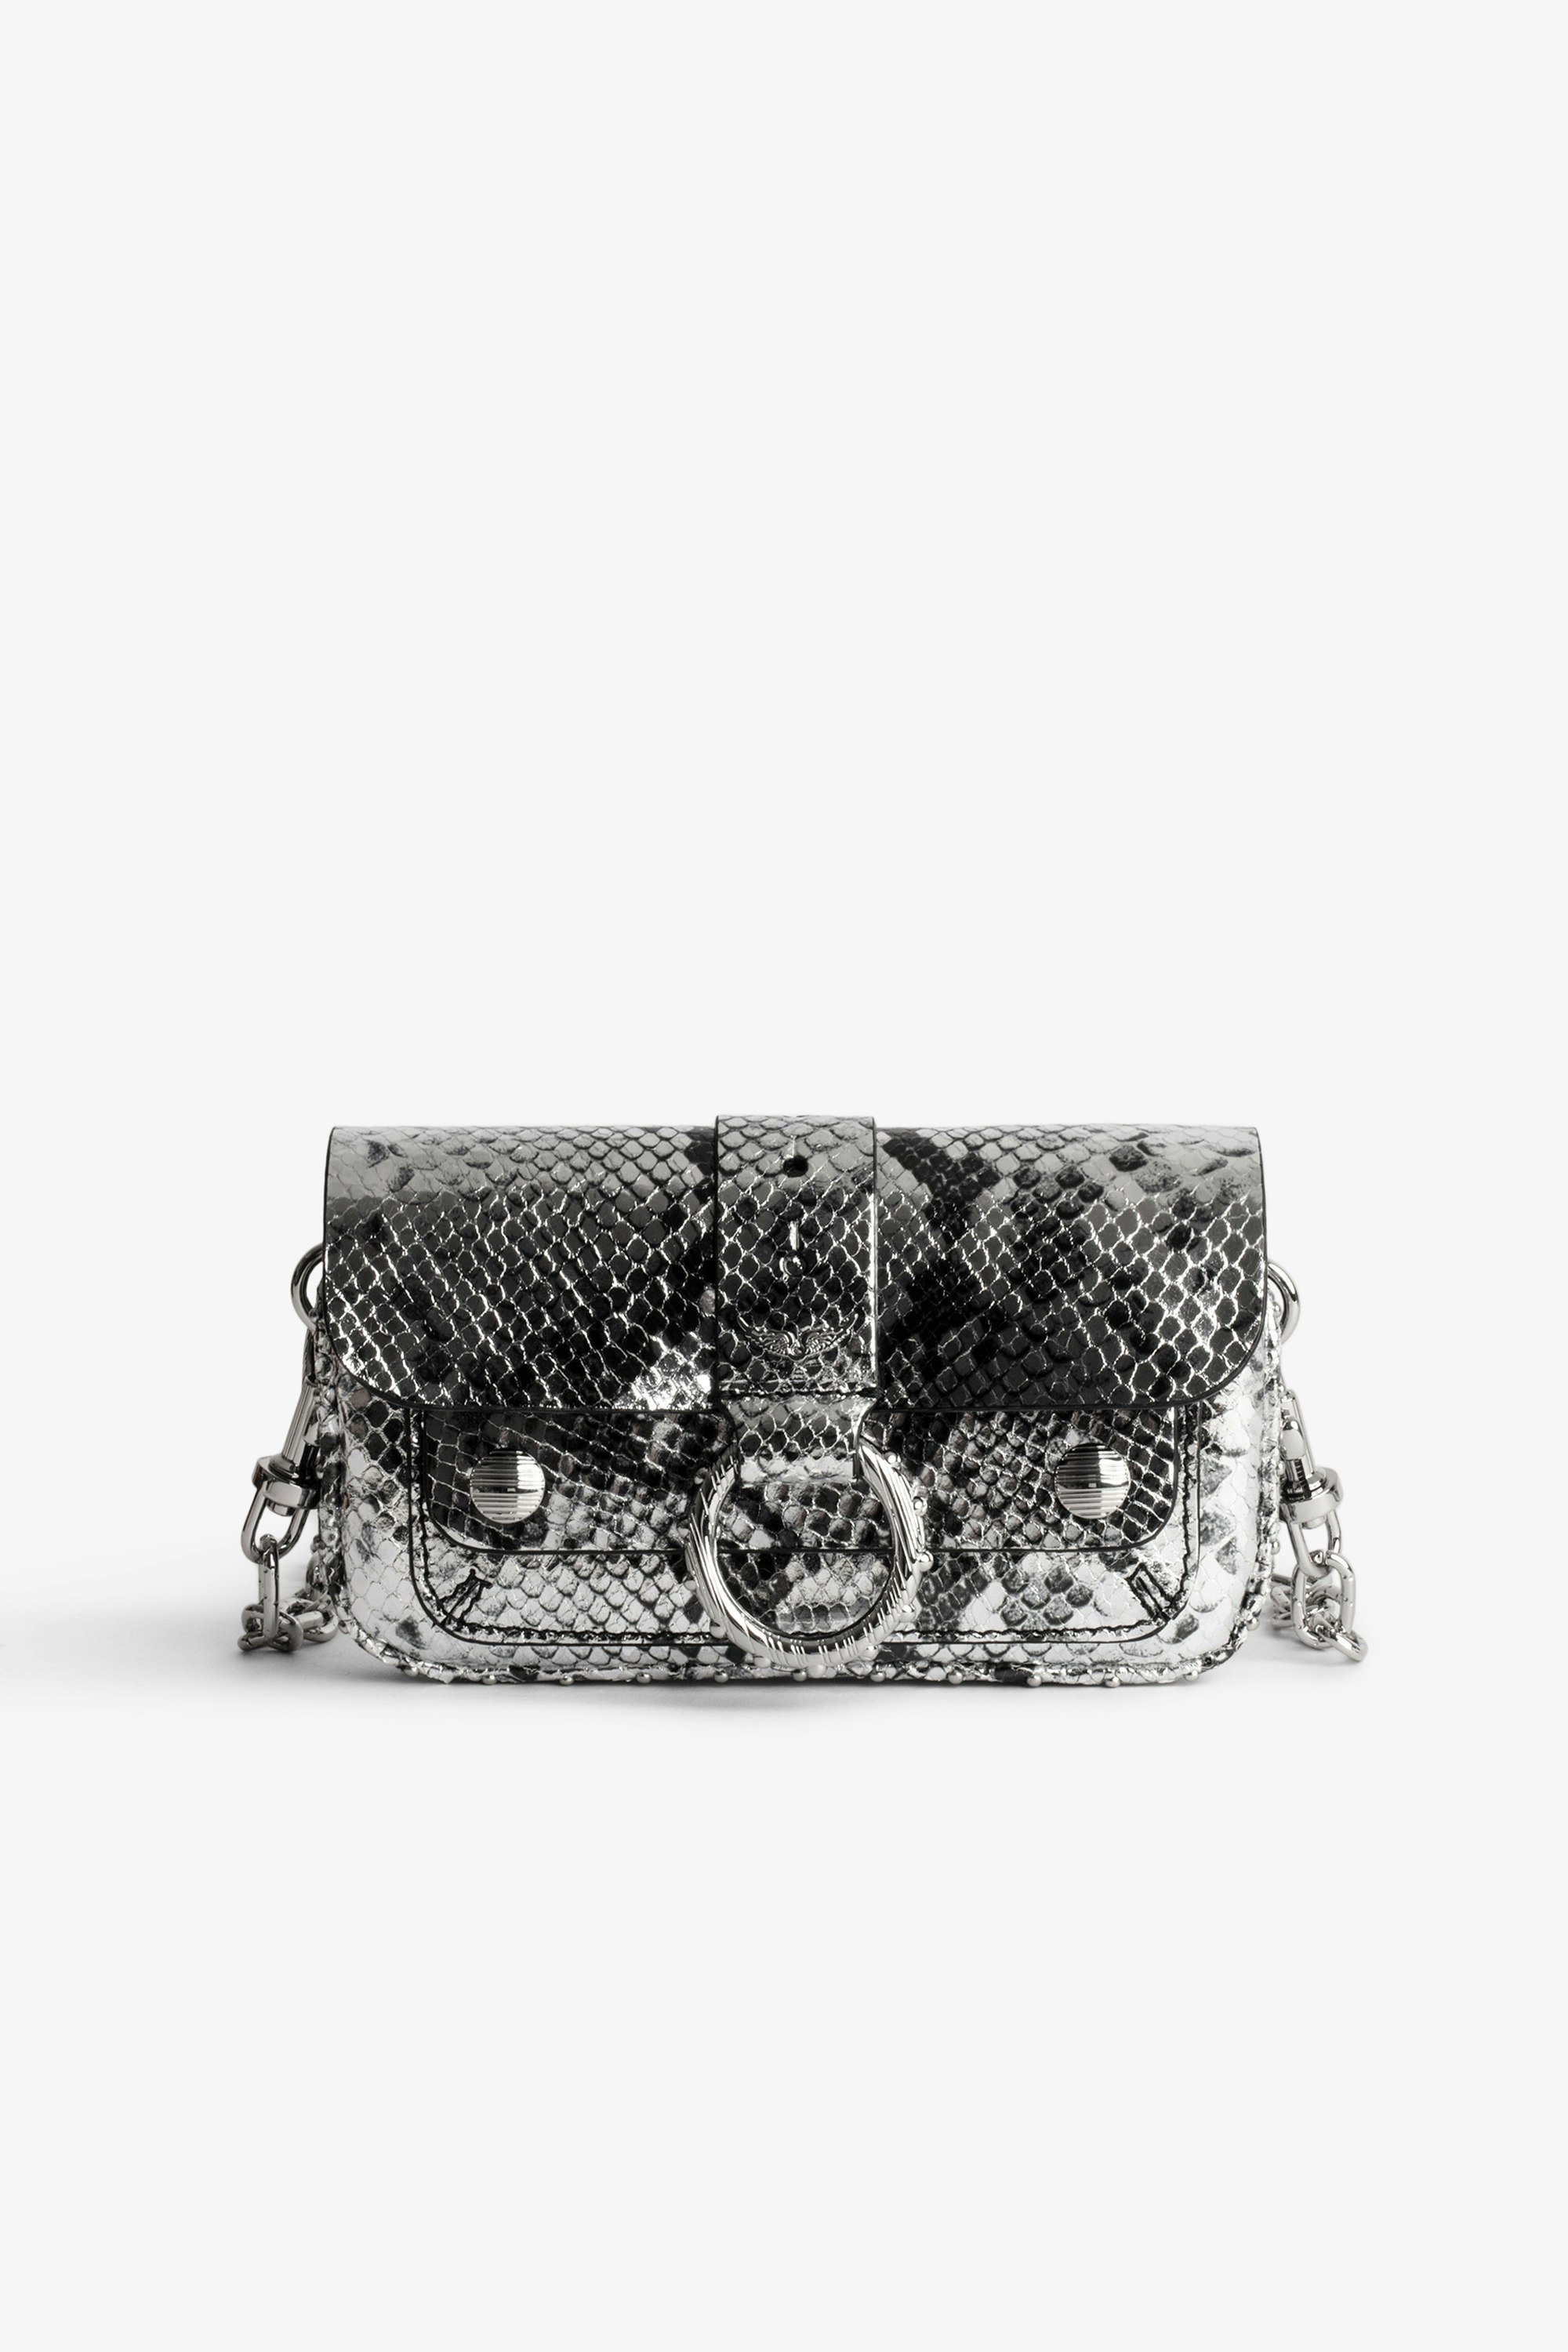 Kate バッグ Women’s silver metallic snake-embossed leather bag with a shoulder strap and flap